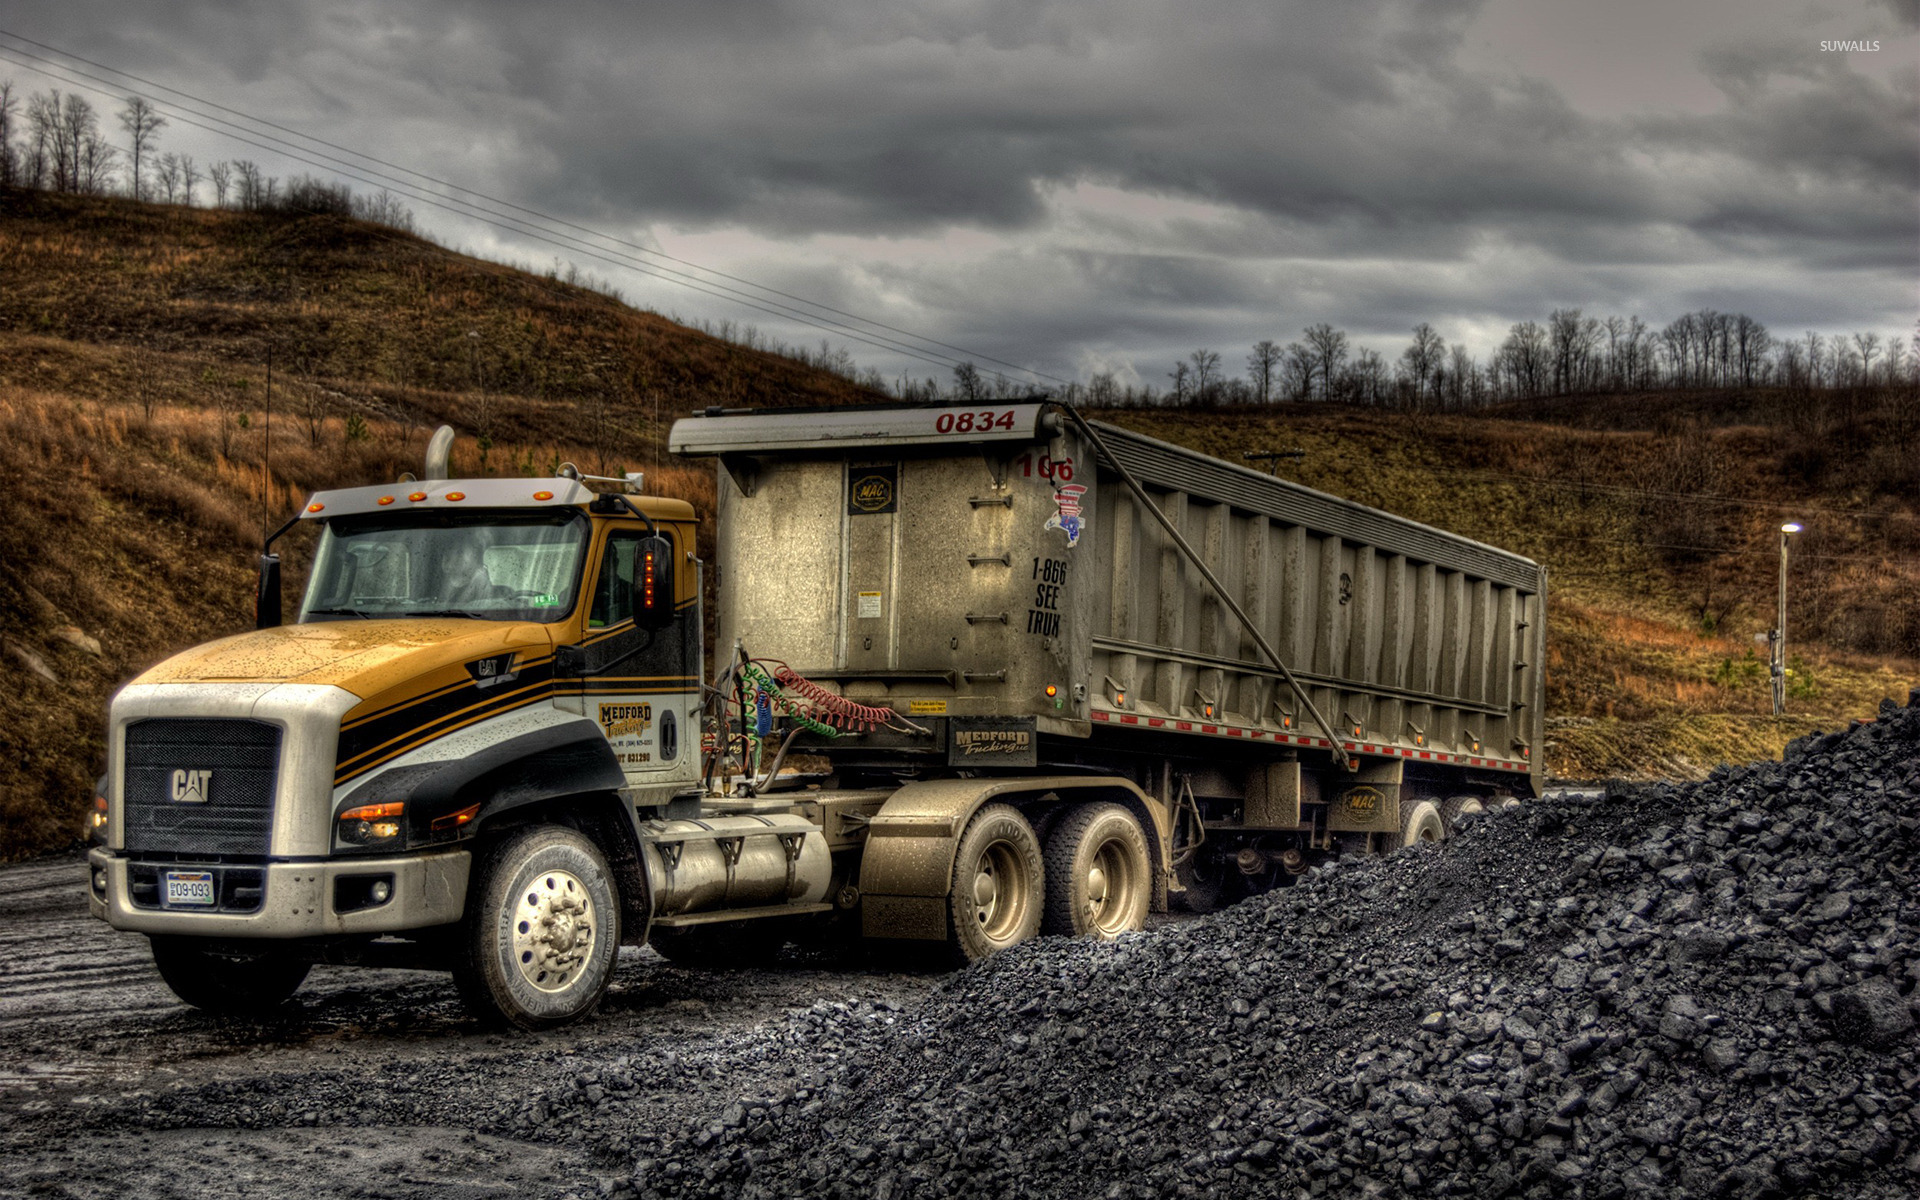 Truck wallpapers, truck backgrounds, truck images 